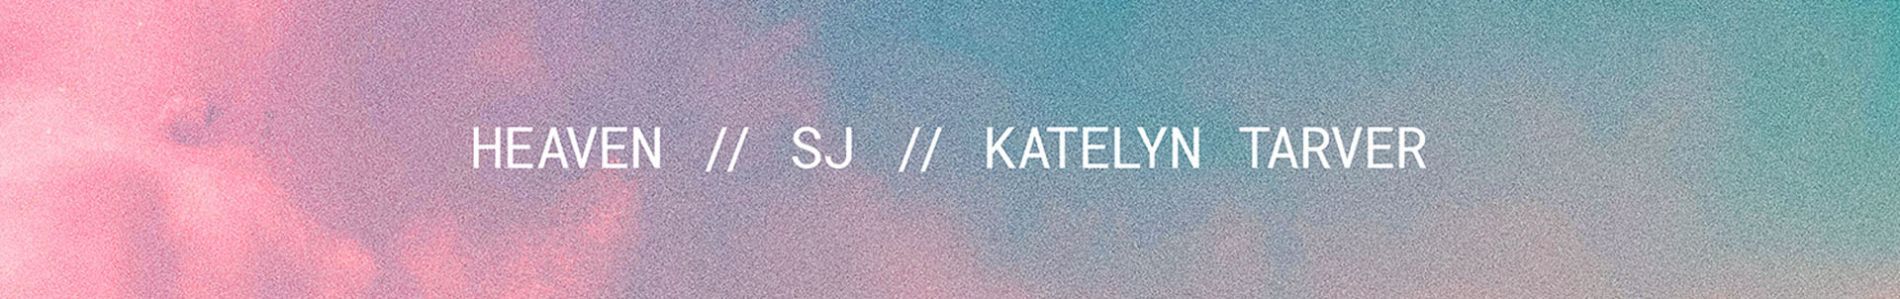 Win a Skype call with SJ & Katelyn Tarver including an acoustic live performance